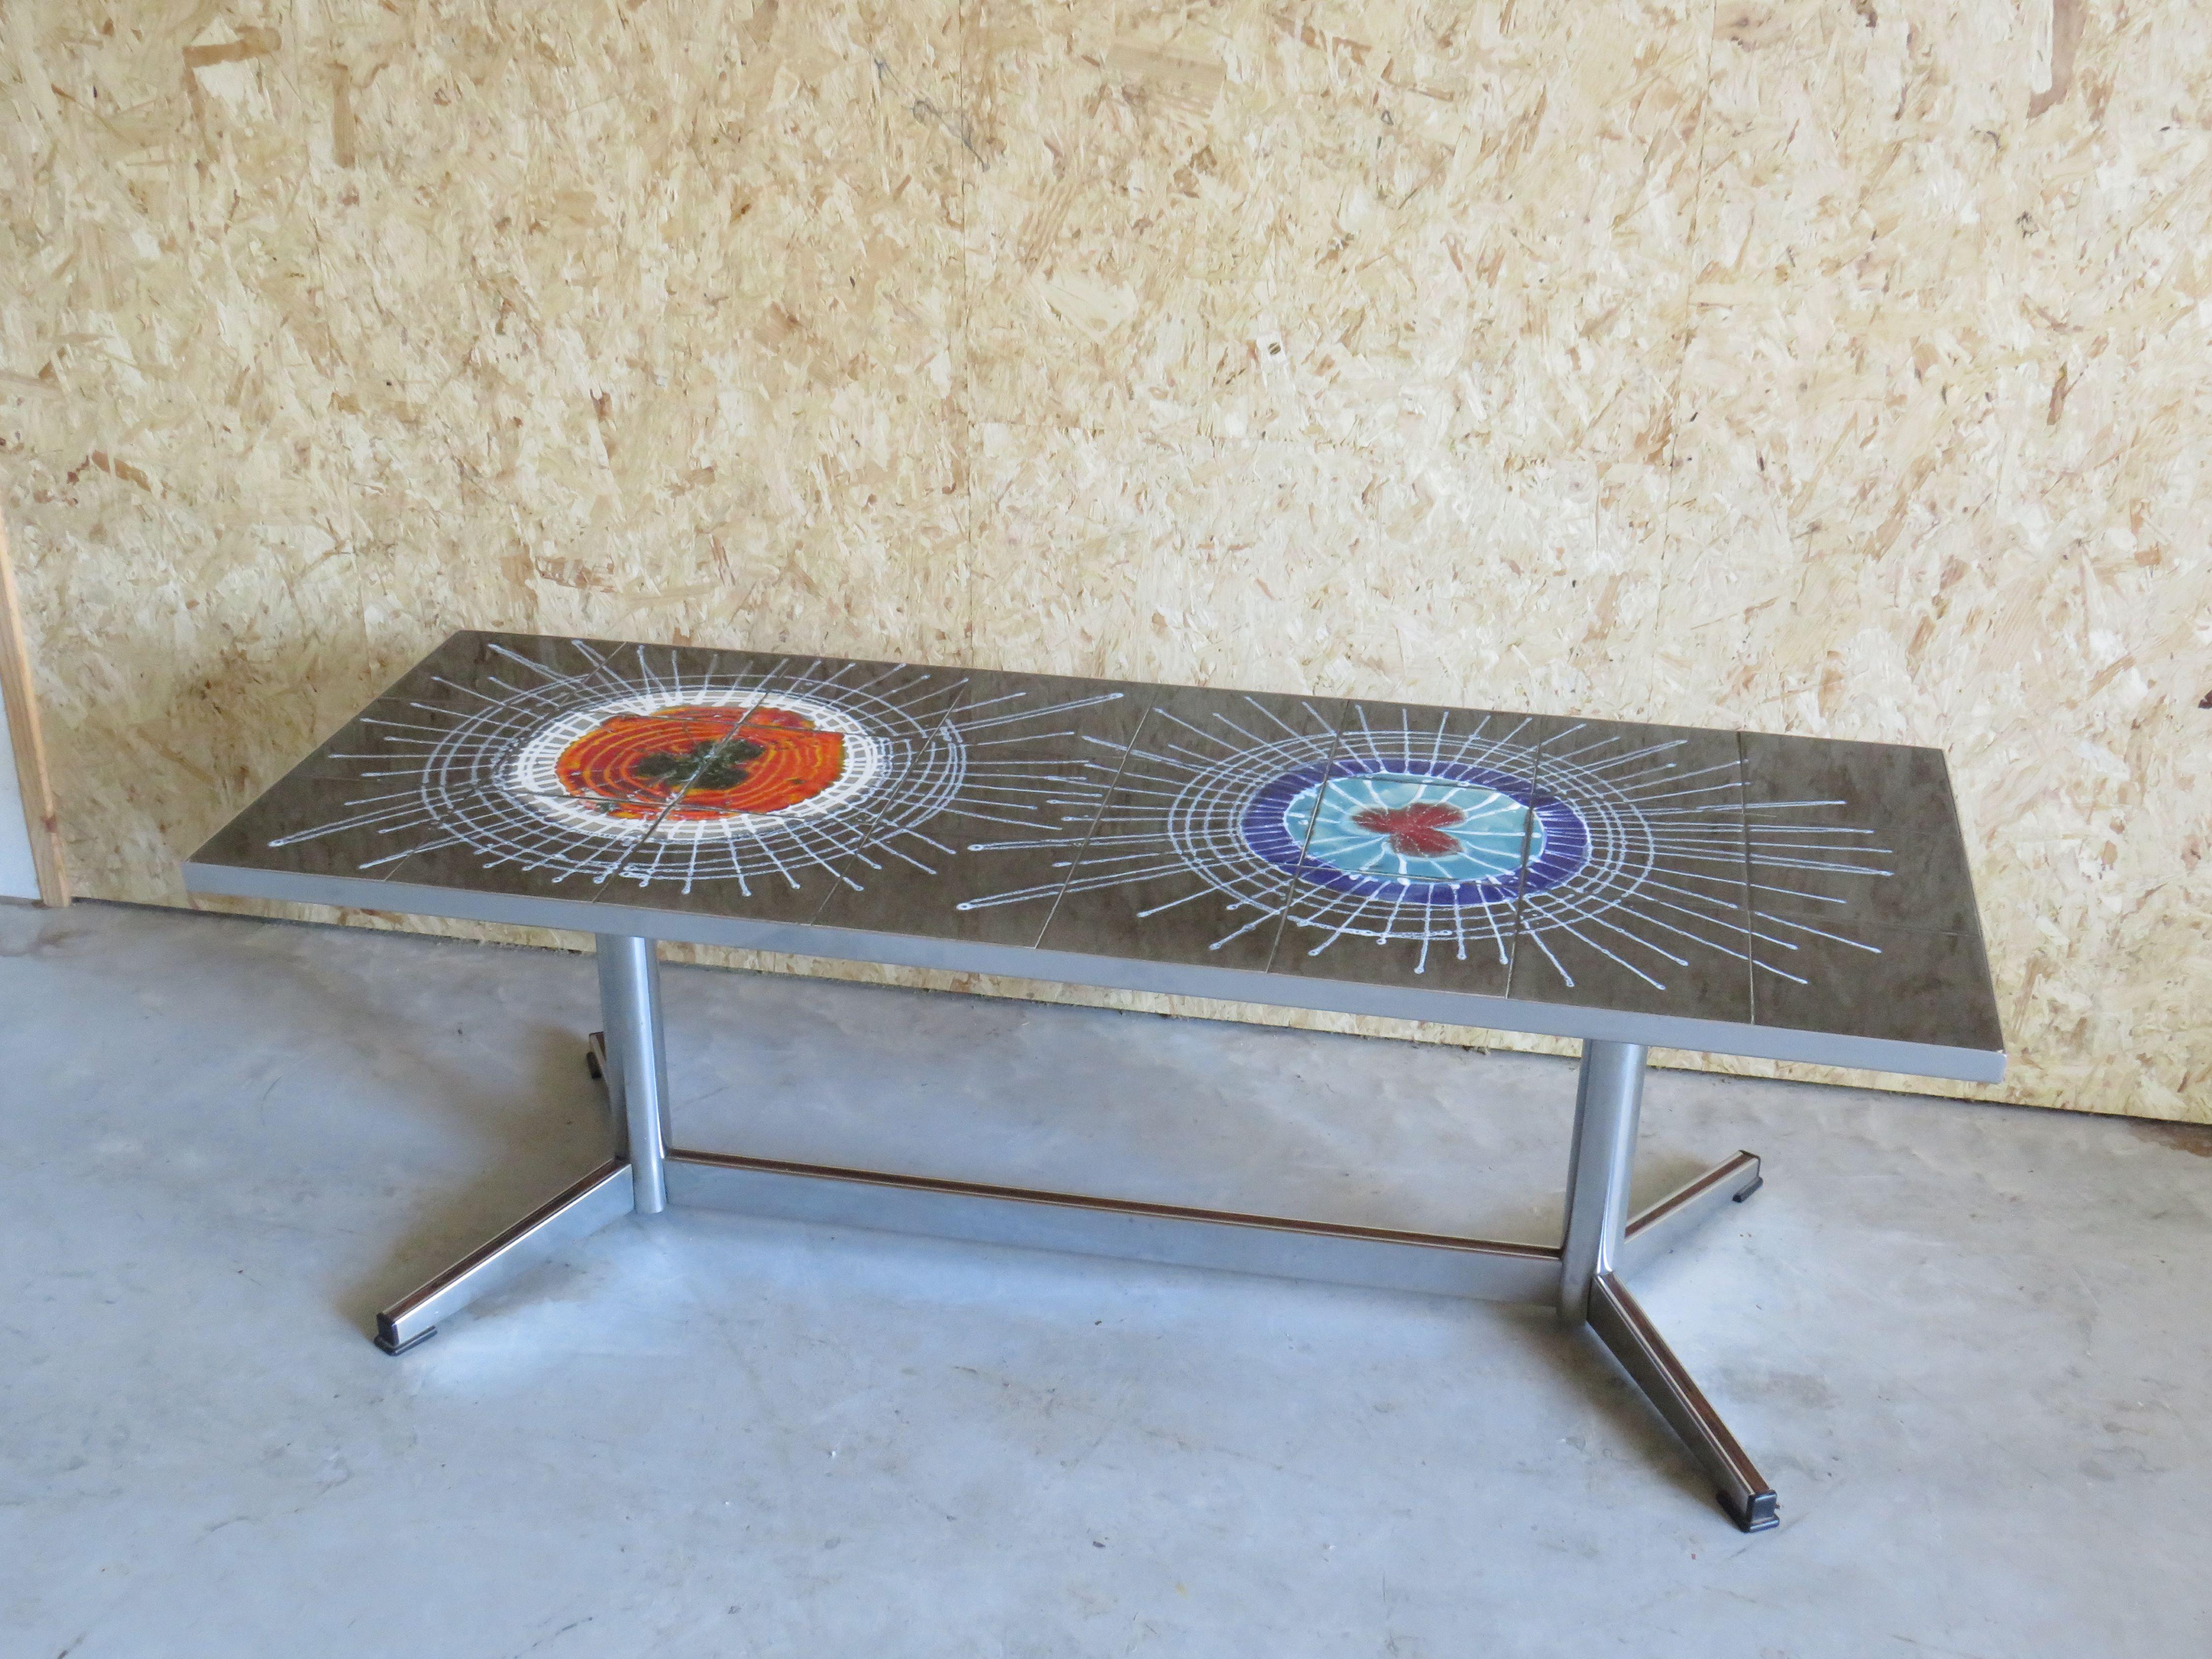 The table has a chromed base with teak (imitation veneer) finish.
The top of the table has ceramic tiles with a beautiful abstract floral pattern, characteristic of Belarti's designs.

